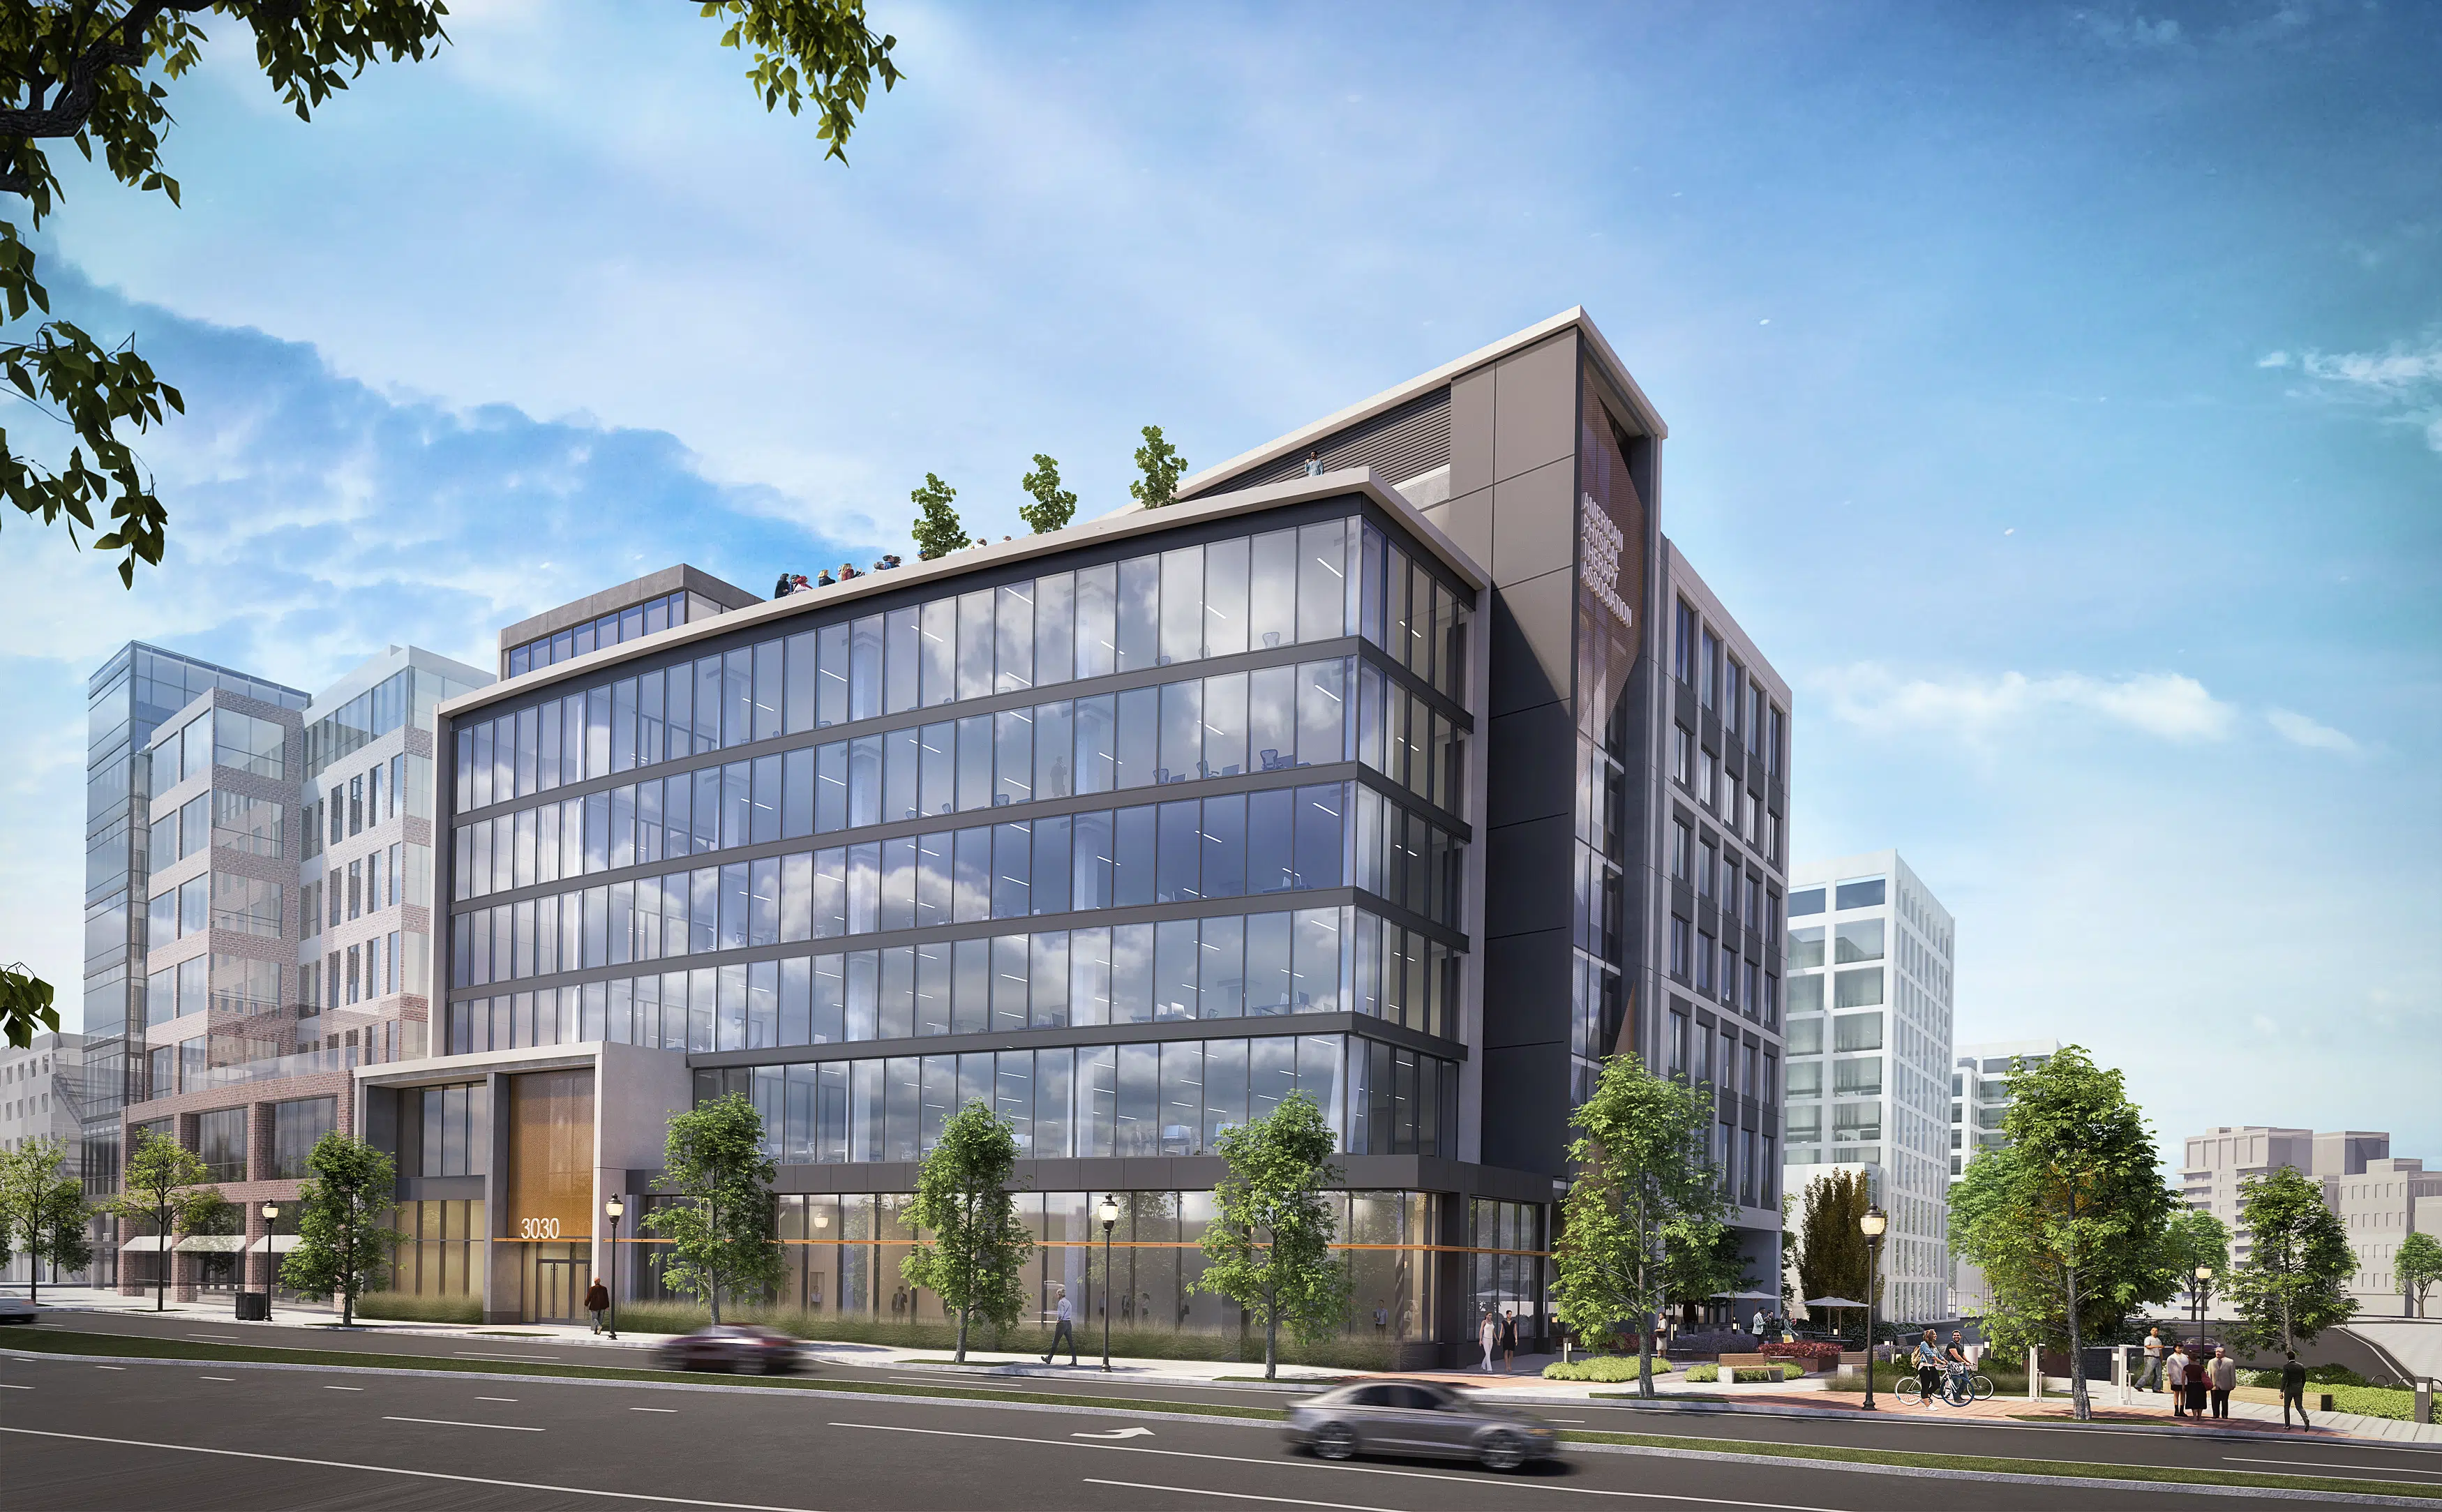 American Physical Therapy Association HQ Rendering